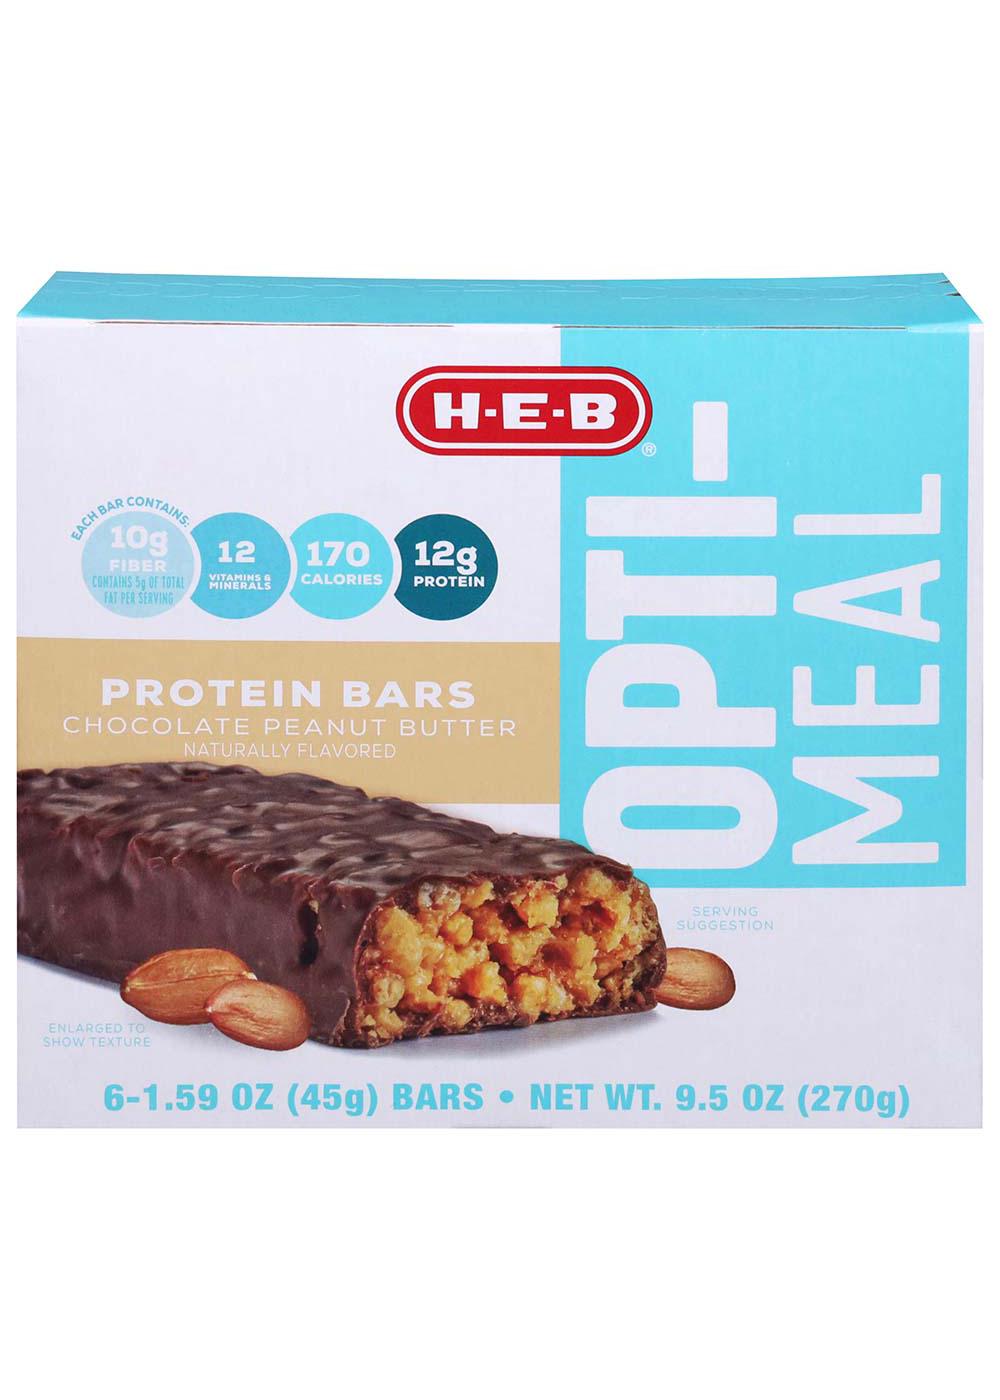 H-E-B Opti-Meal 12g Protein Bars - Chocolate Peanut Butter; image 1 of 2